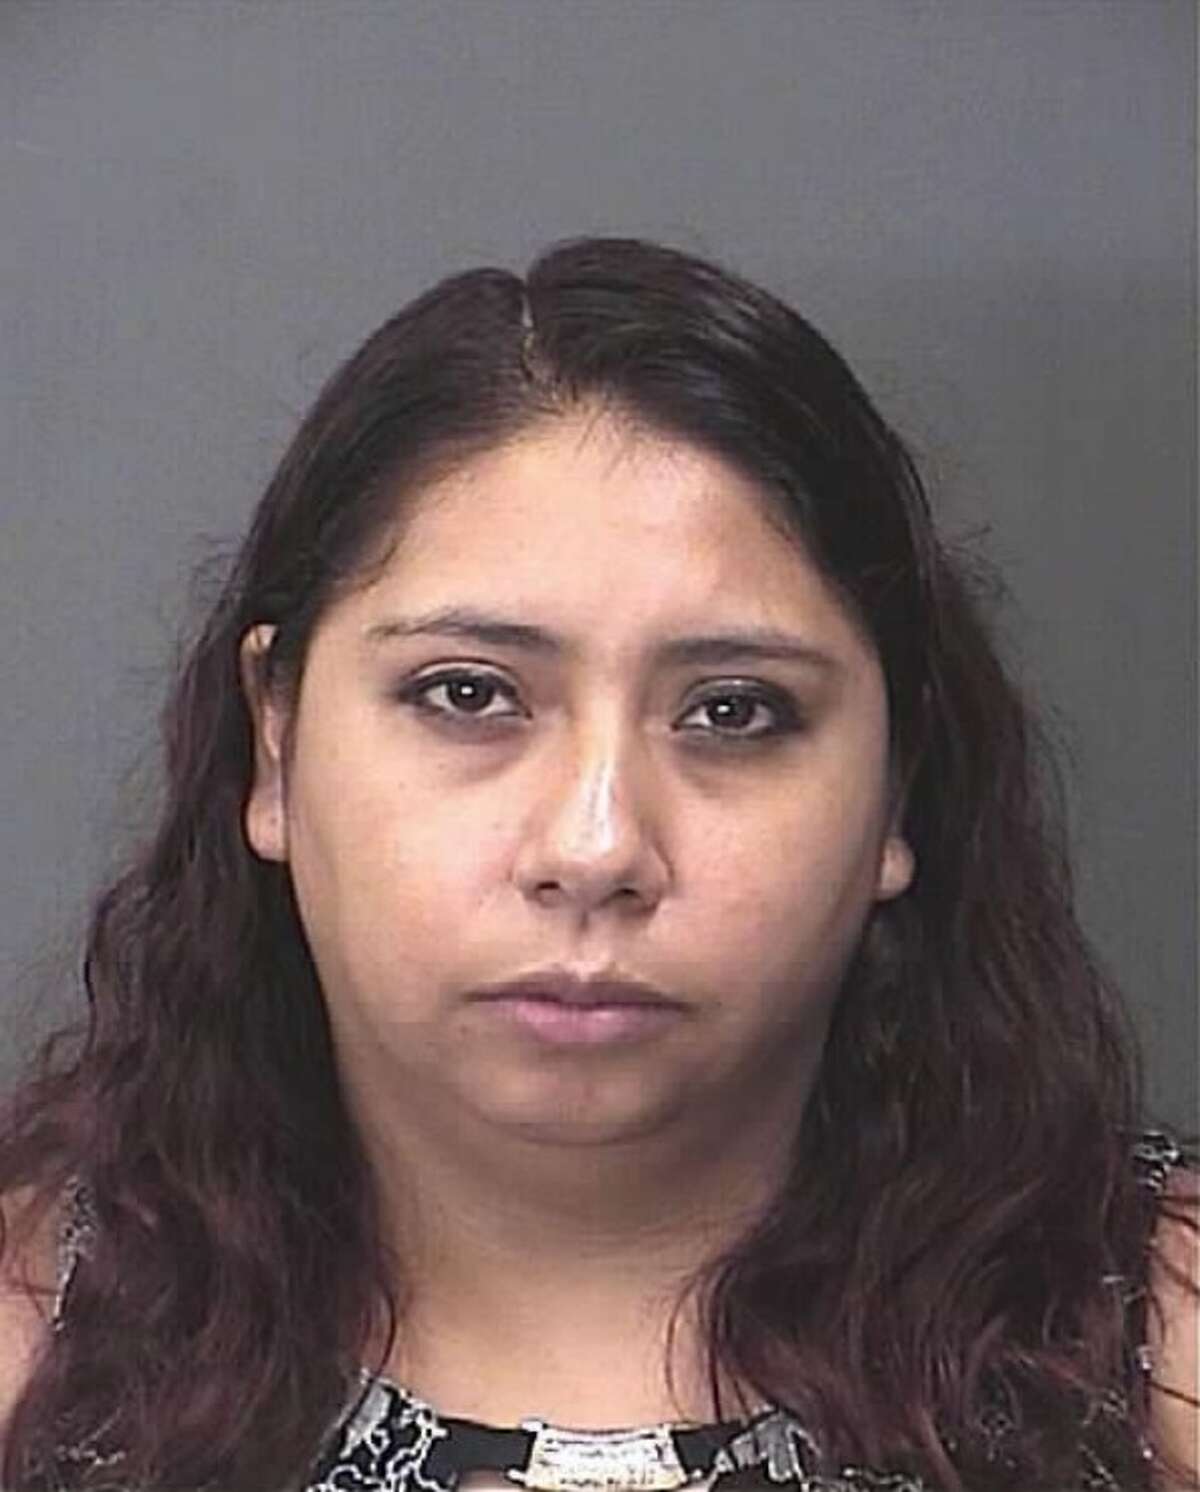 Cristina Enriquez, 29, of Baytown is charged with child endangerment in Harris County. SLIDESHOW: Houston-area parents whose arrests made the news